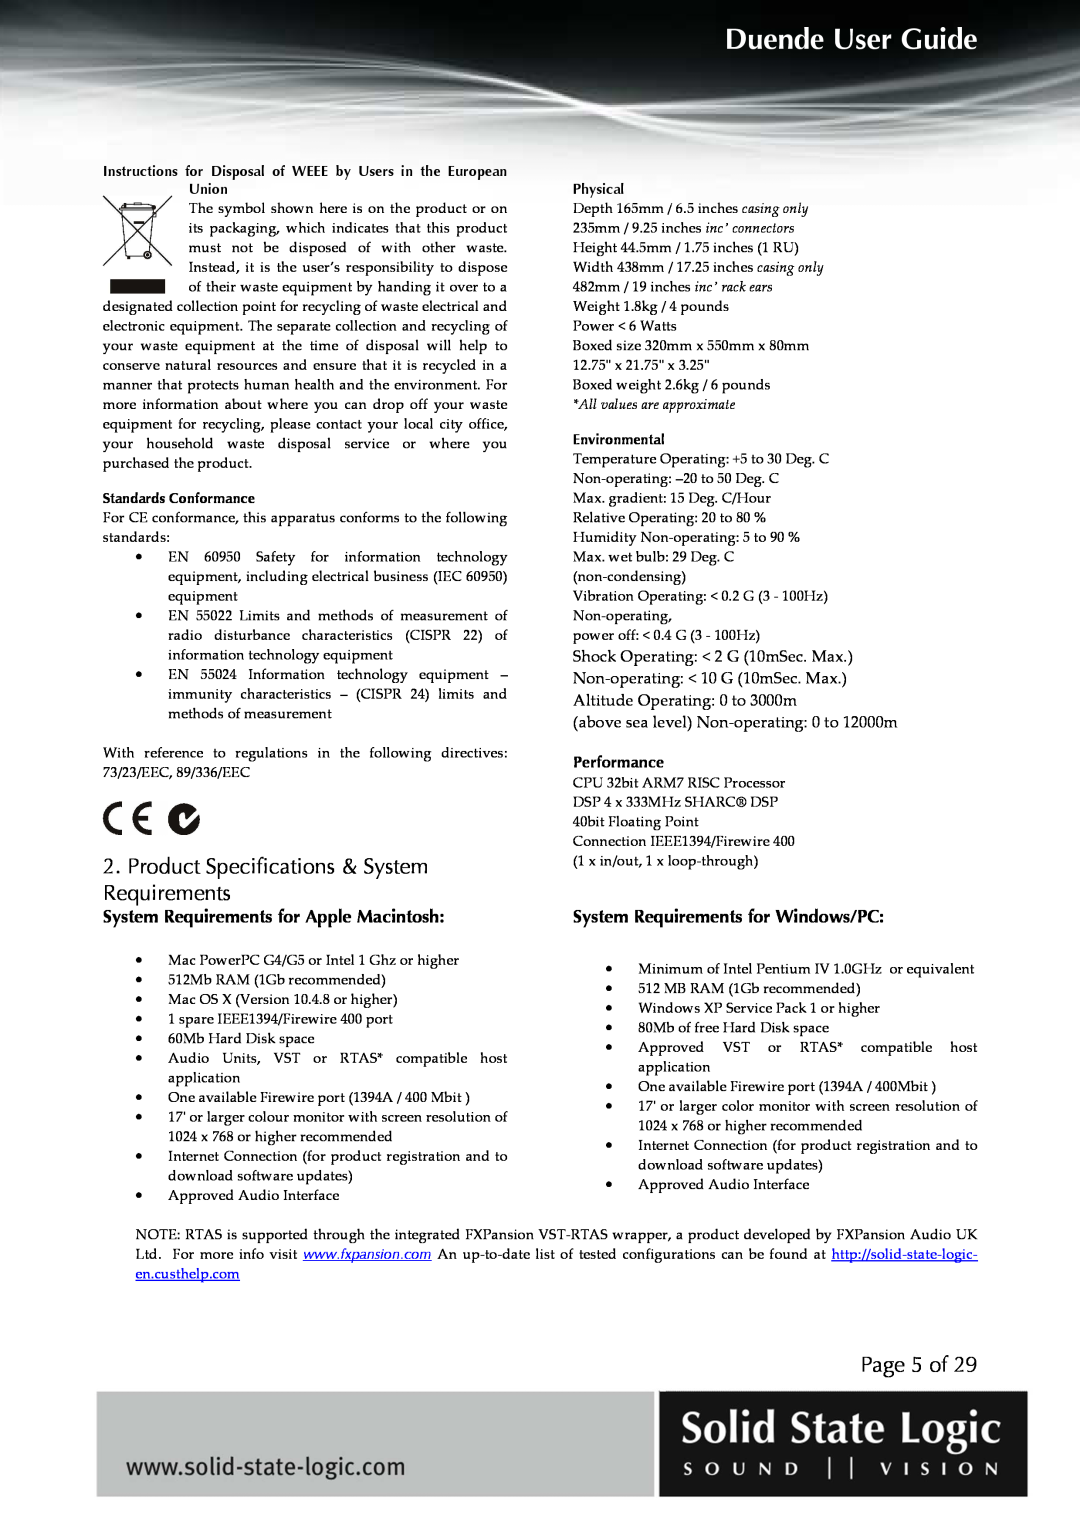 Solid State Logic DUENDE manual Product Specifications & System Requirements, Page 5 of, Duende User Guide, Performance 